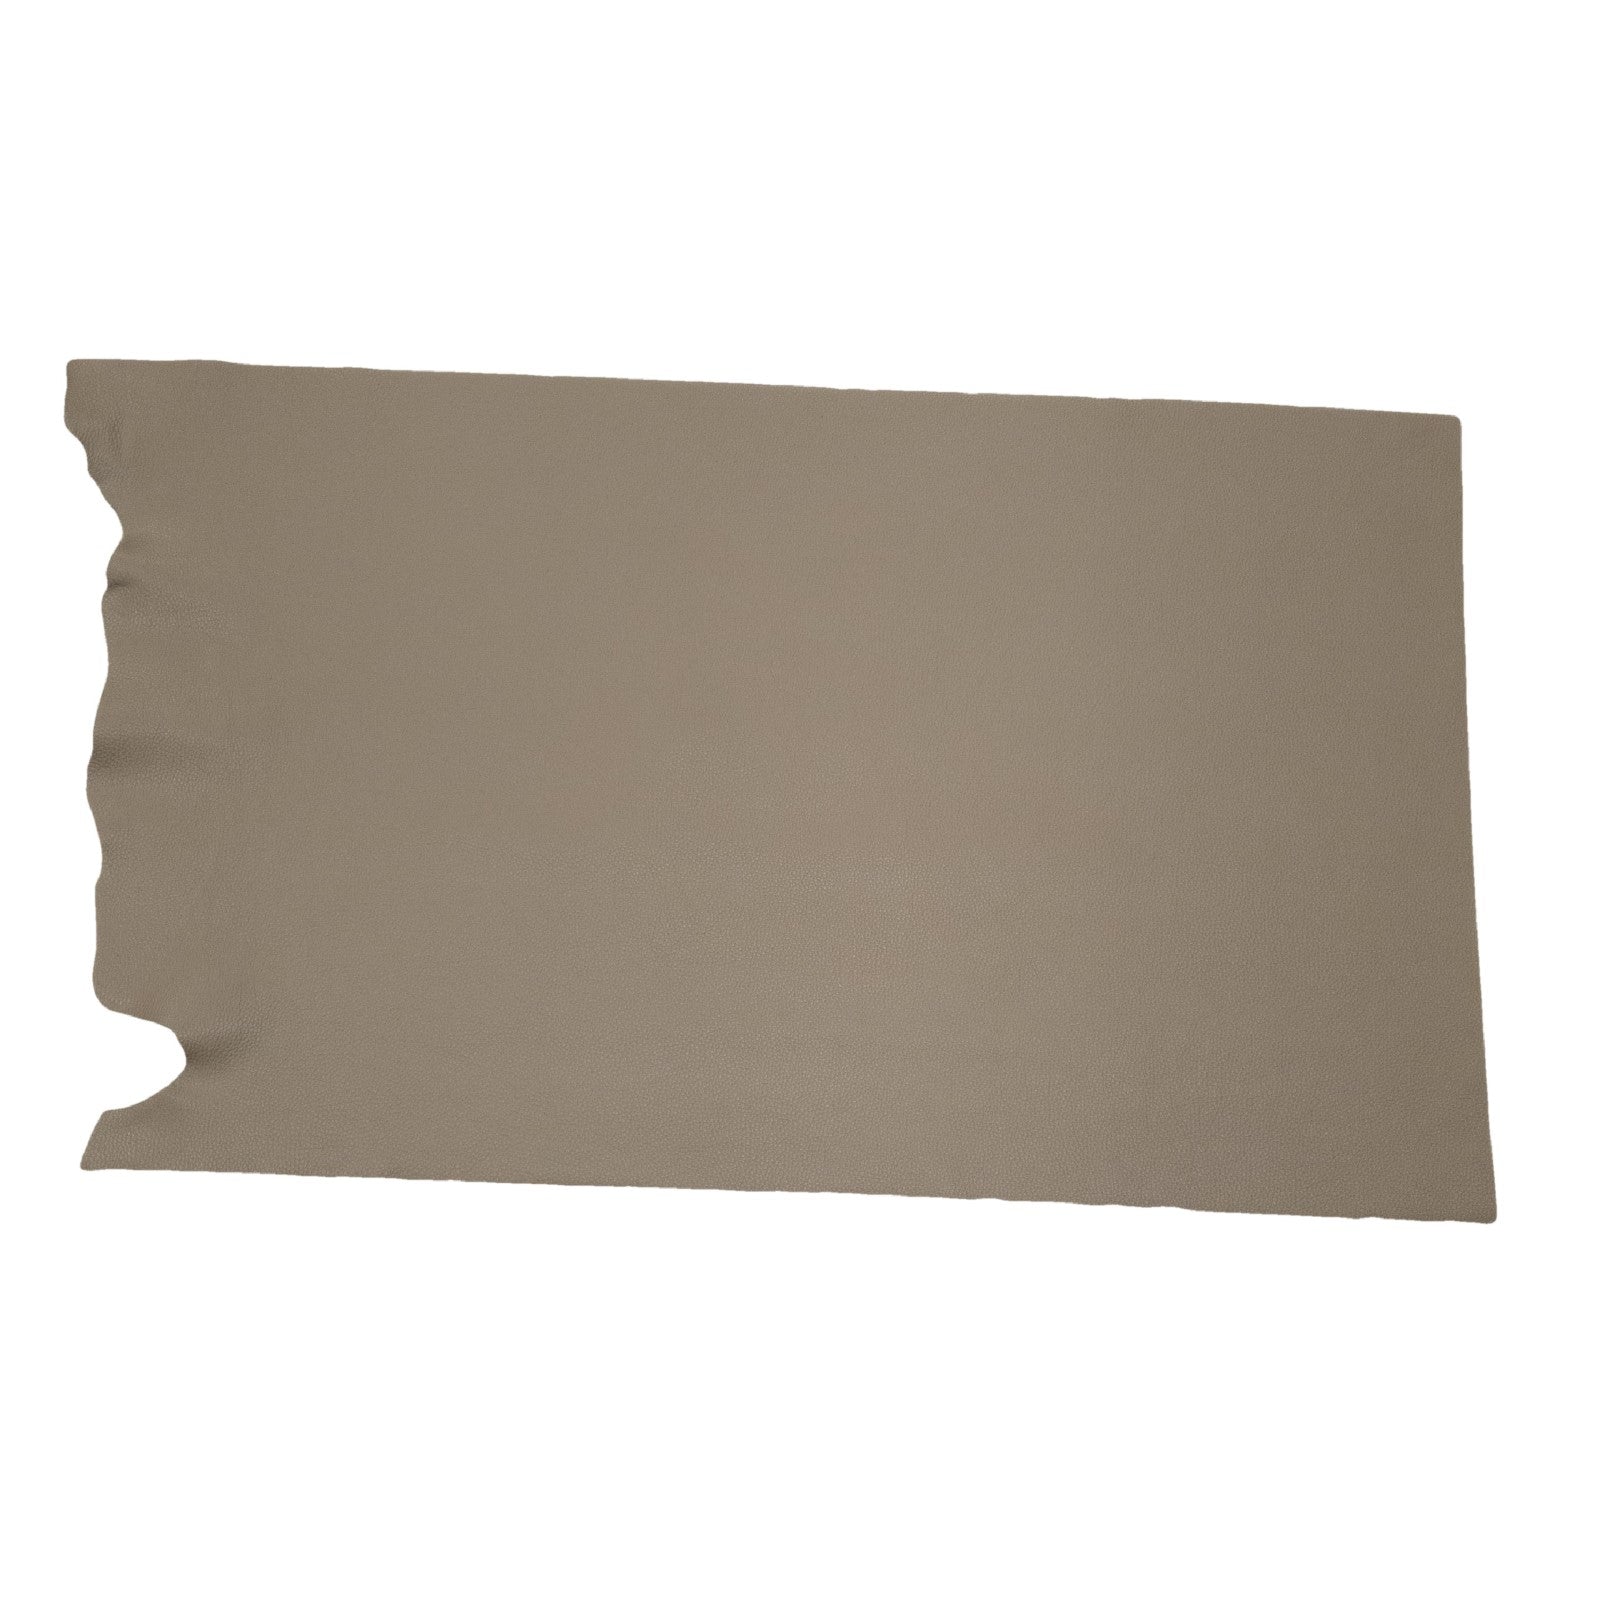 Tan Lines Taupe, Tried n True, Summer Edition,  3-4 oz Leather Cow Hides, 6.5-7.5 Square Foot / Project Piece (Middle) | The Leather Guy